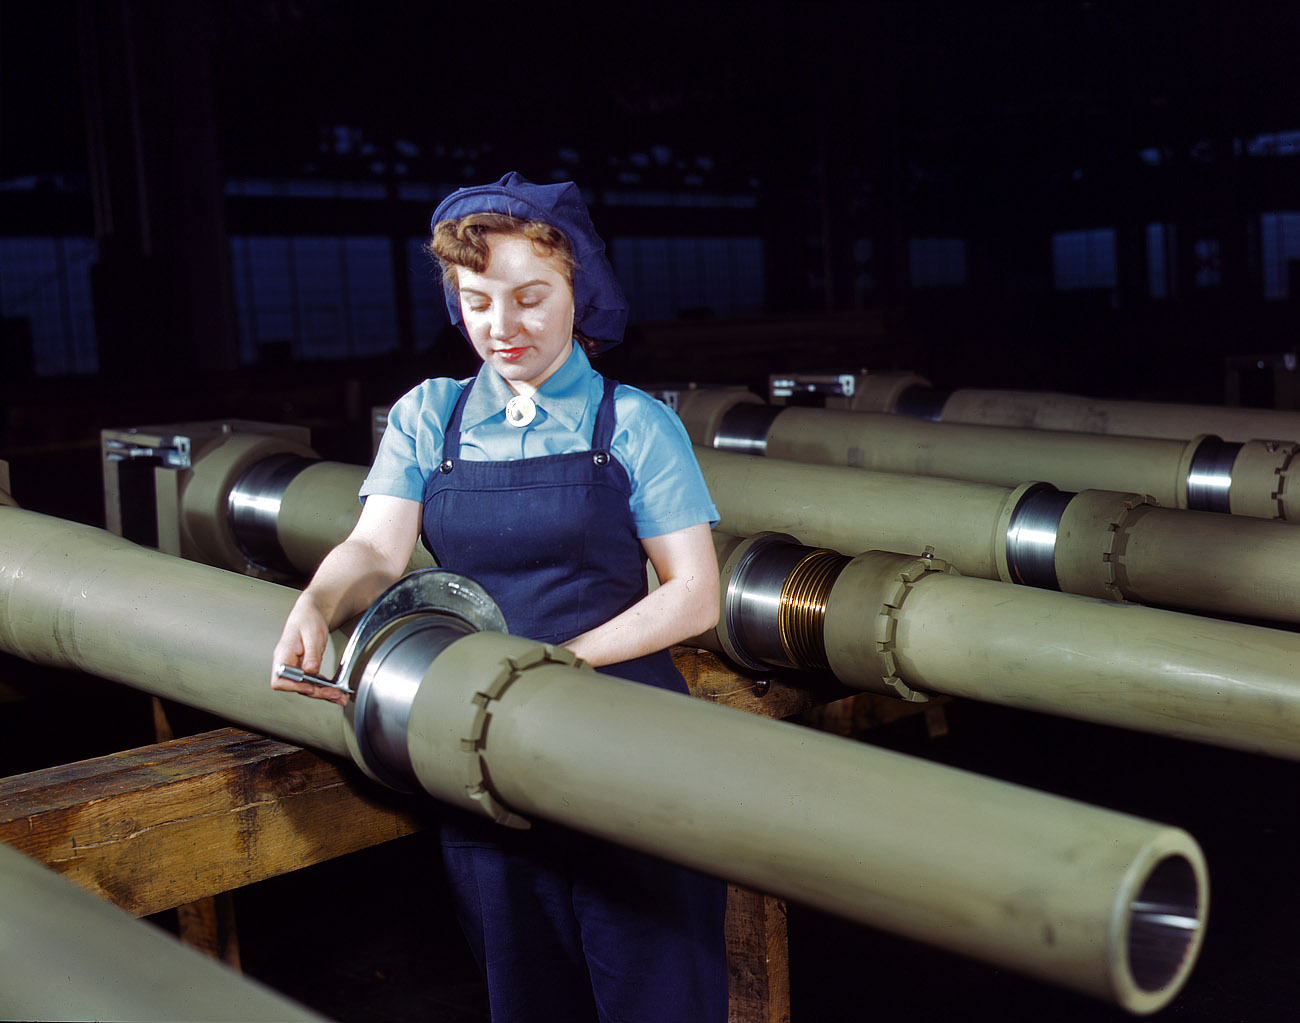 February 1943. "Mrs. Mary Betchner measuring 105mm howitzers at the Milwaukee, Wisconsin, plant of the Chain Belt Company. Her son is in the Army; her husband and daughter are in war work." View full size. 4x5 Kodachrome transparency by Howard Hollem for the Office of War Information.